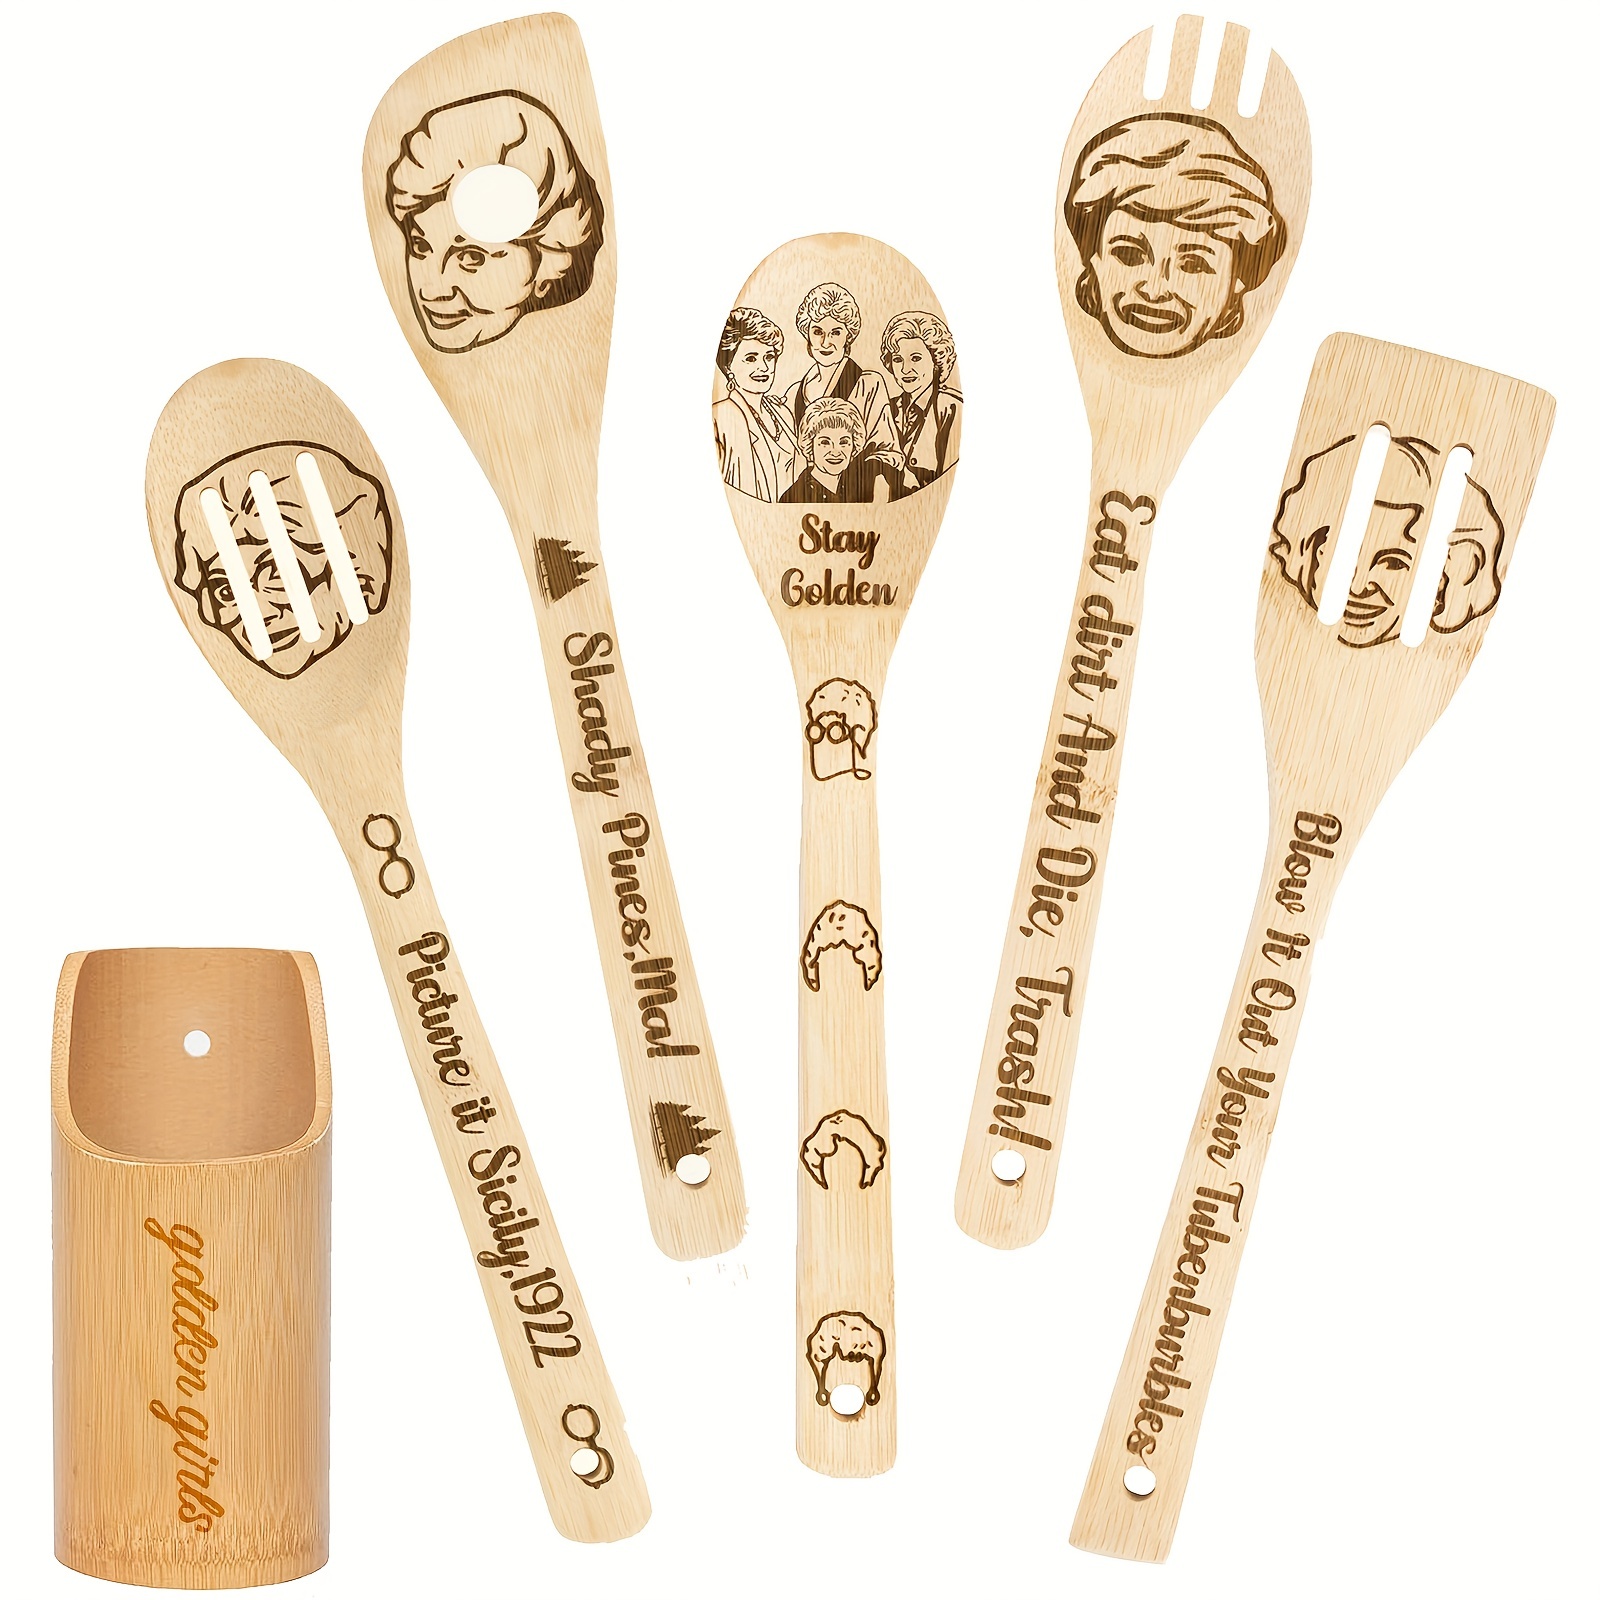 Friends TV Show Merchandise,Wooden Spoons for Cooking Utensils Set,Funny  Wooden Spatula Set for Kitchen Decor,Friends TV Show Decor,Friends TV Show  Gifts for women,Housewarming Present (5PCS) Friends spoons 